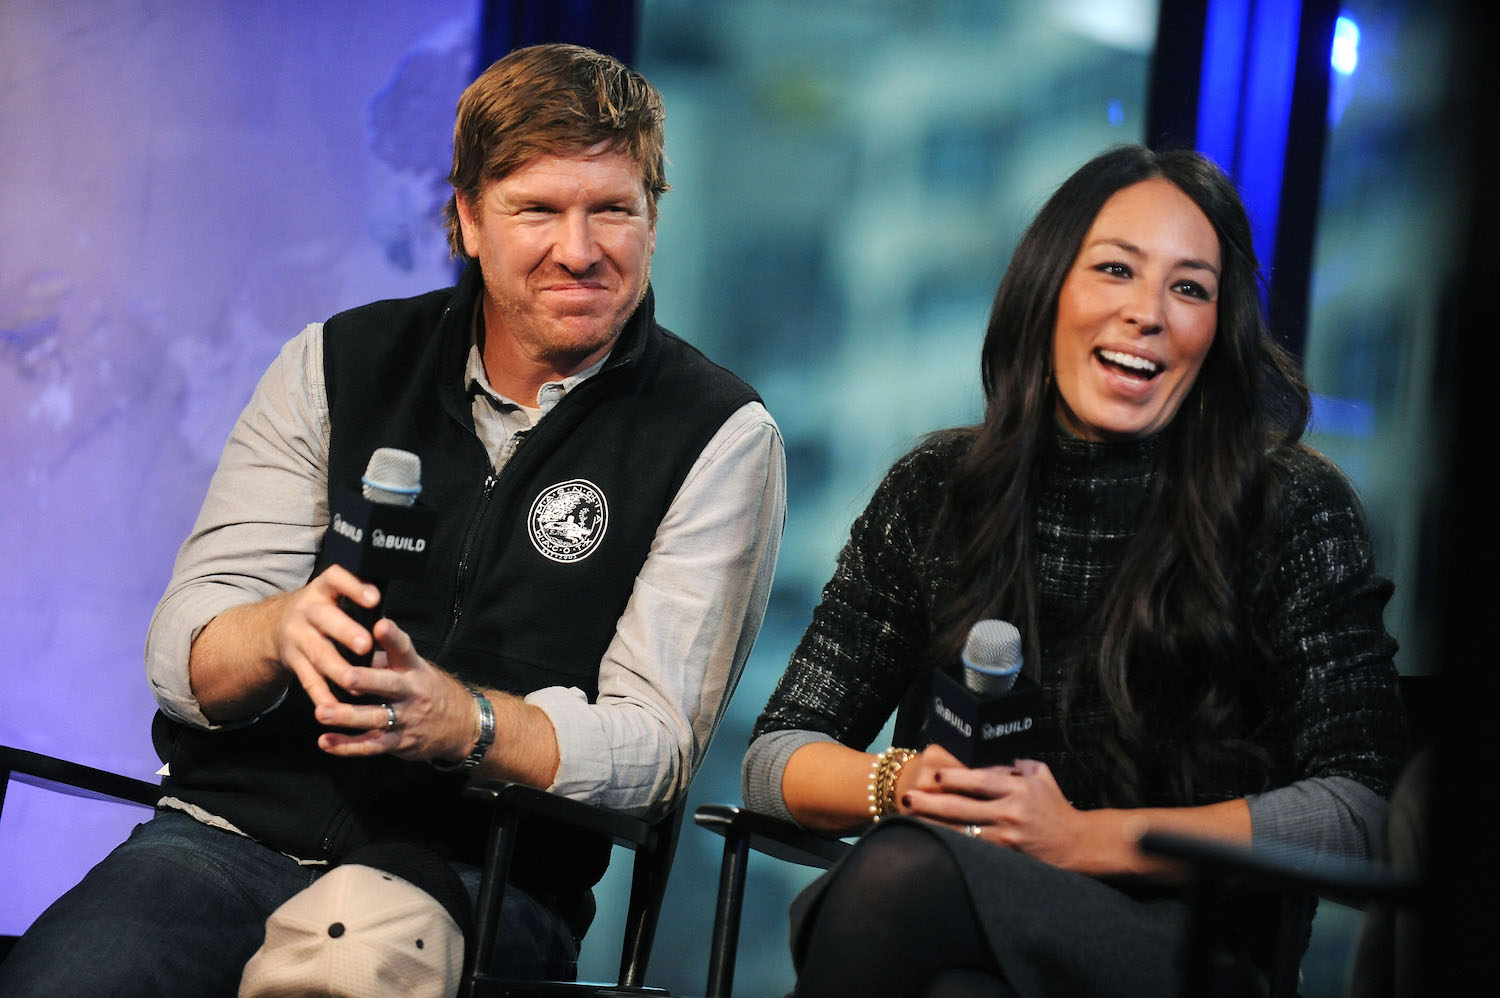 'Fixer Upper' stars Chip and Joanna Gaines smiling while on stage